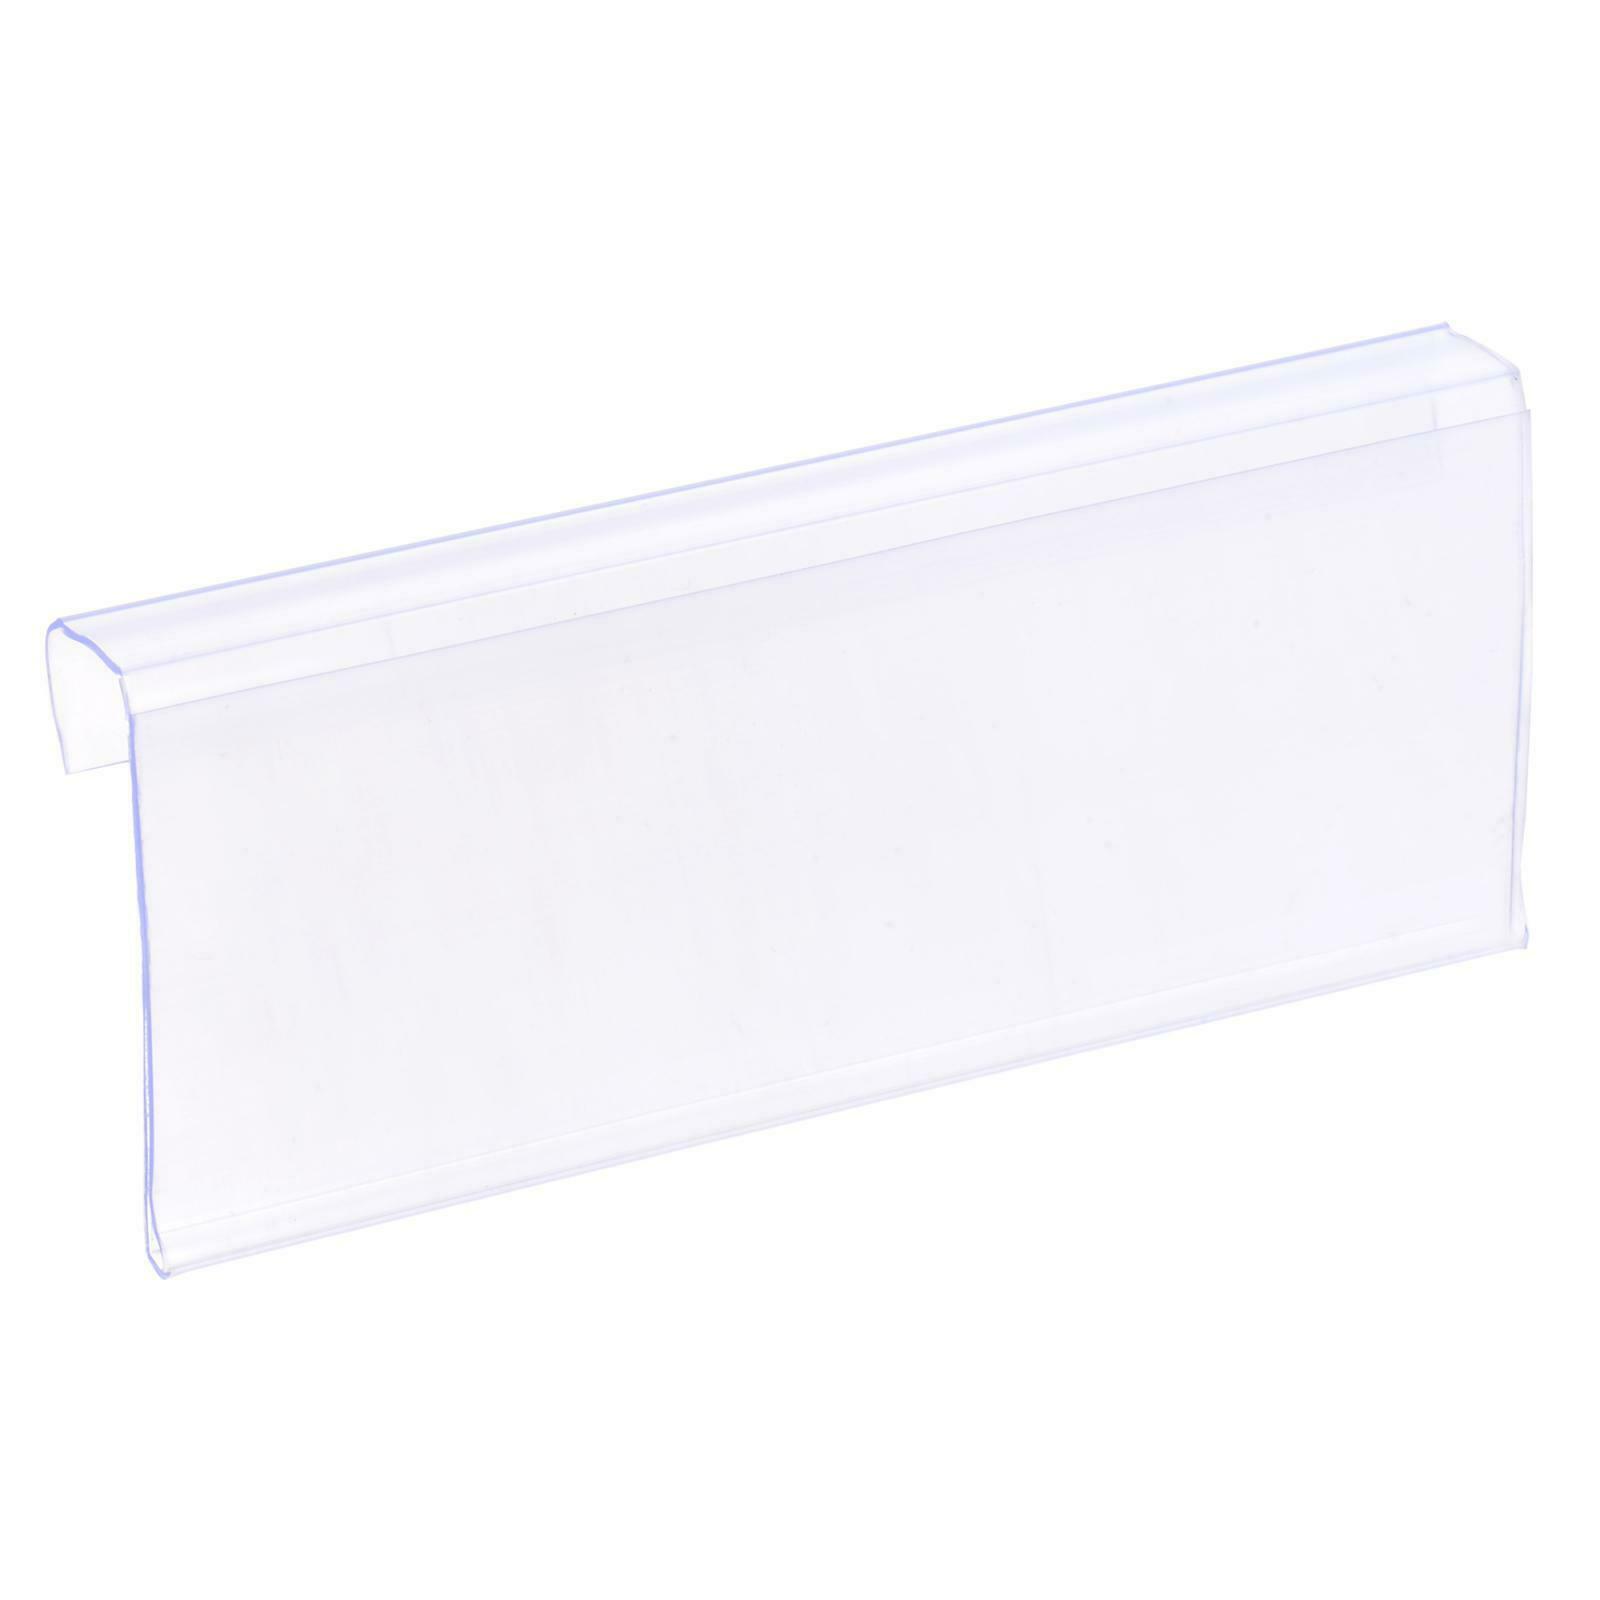 Label Holder L Shape 100x40mm Clear Plastic For Wire Shelf, Pack Of 30